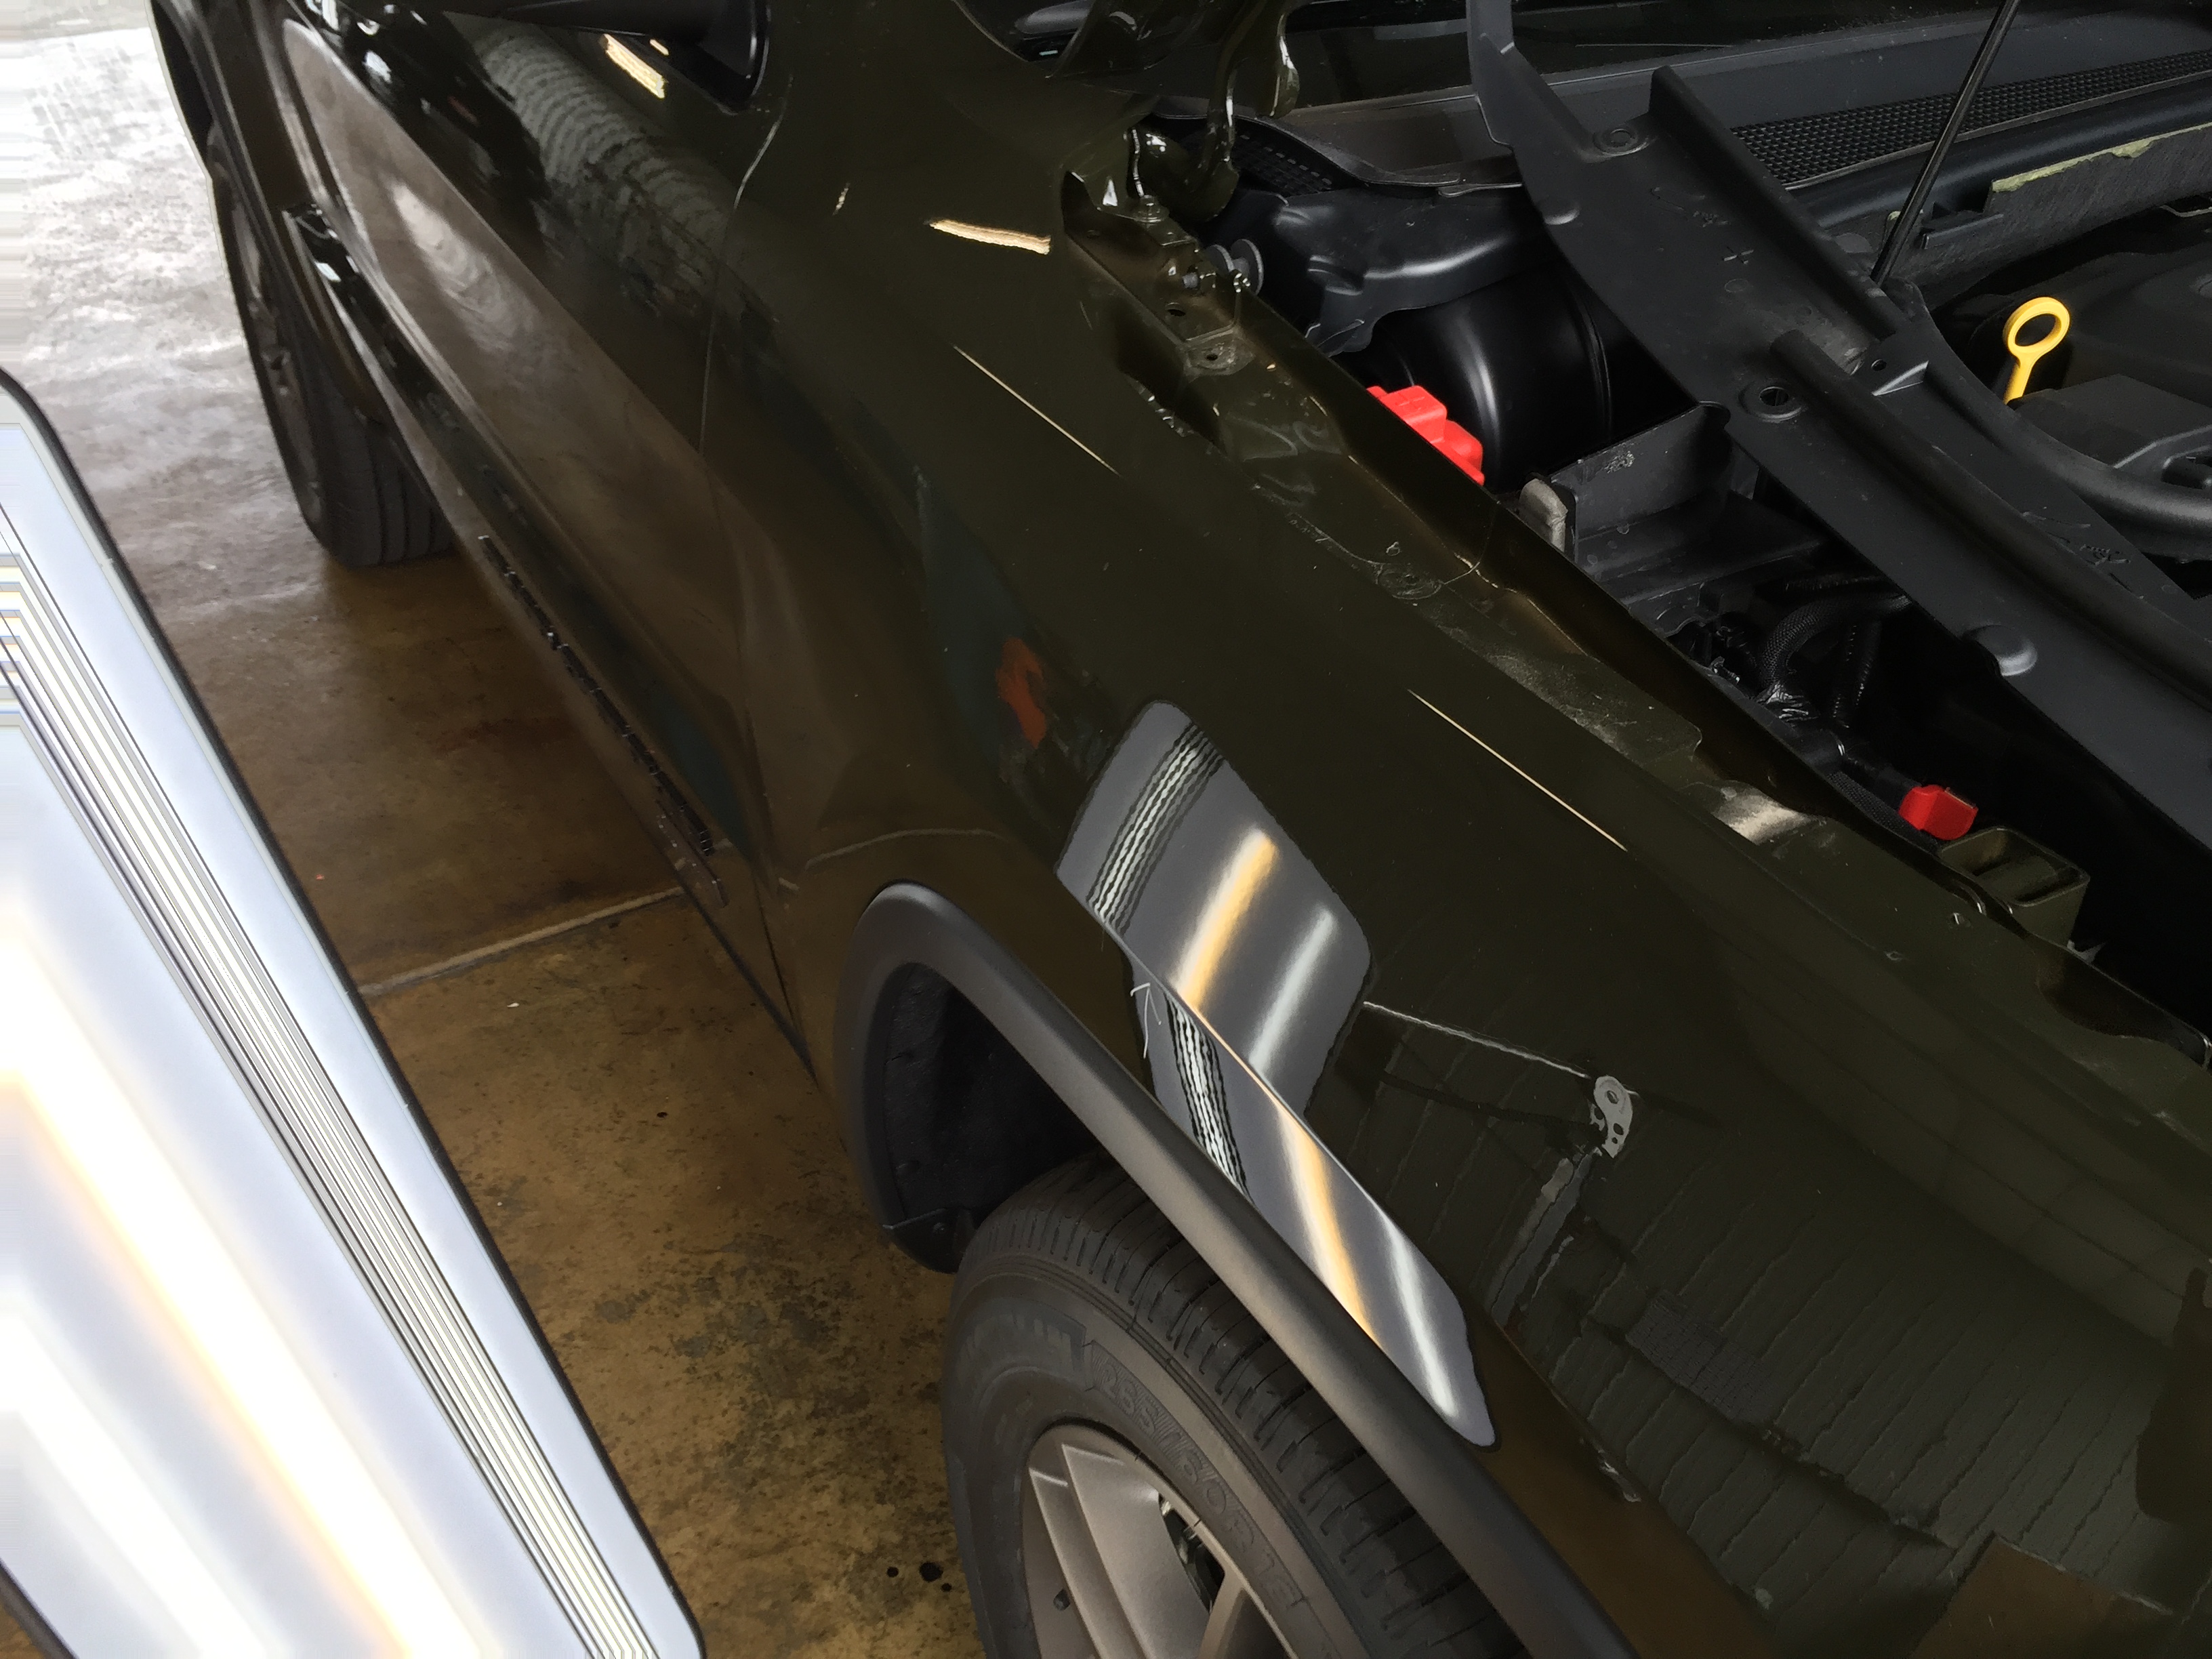 2016 Jeep Grand Cherokee Fender Dent Removed with Paintless Dent Removal, Springfield, IL, http://217dent.com